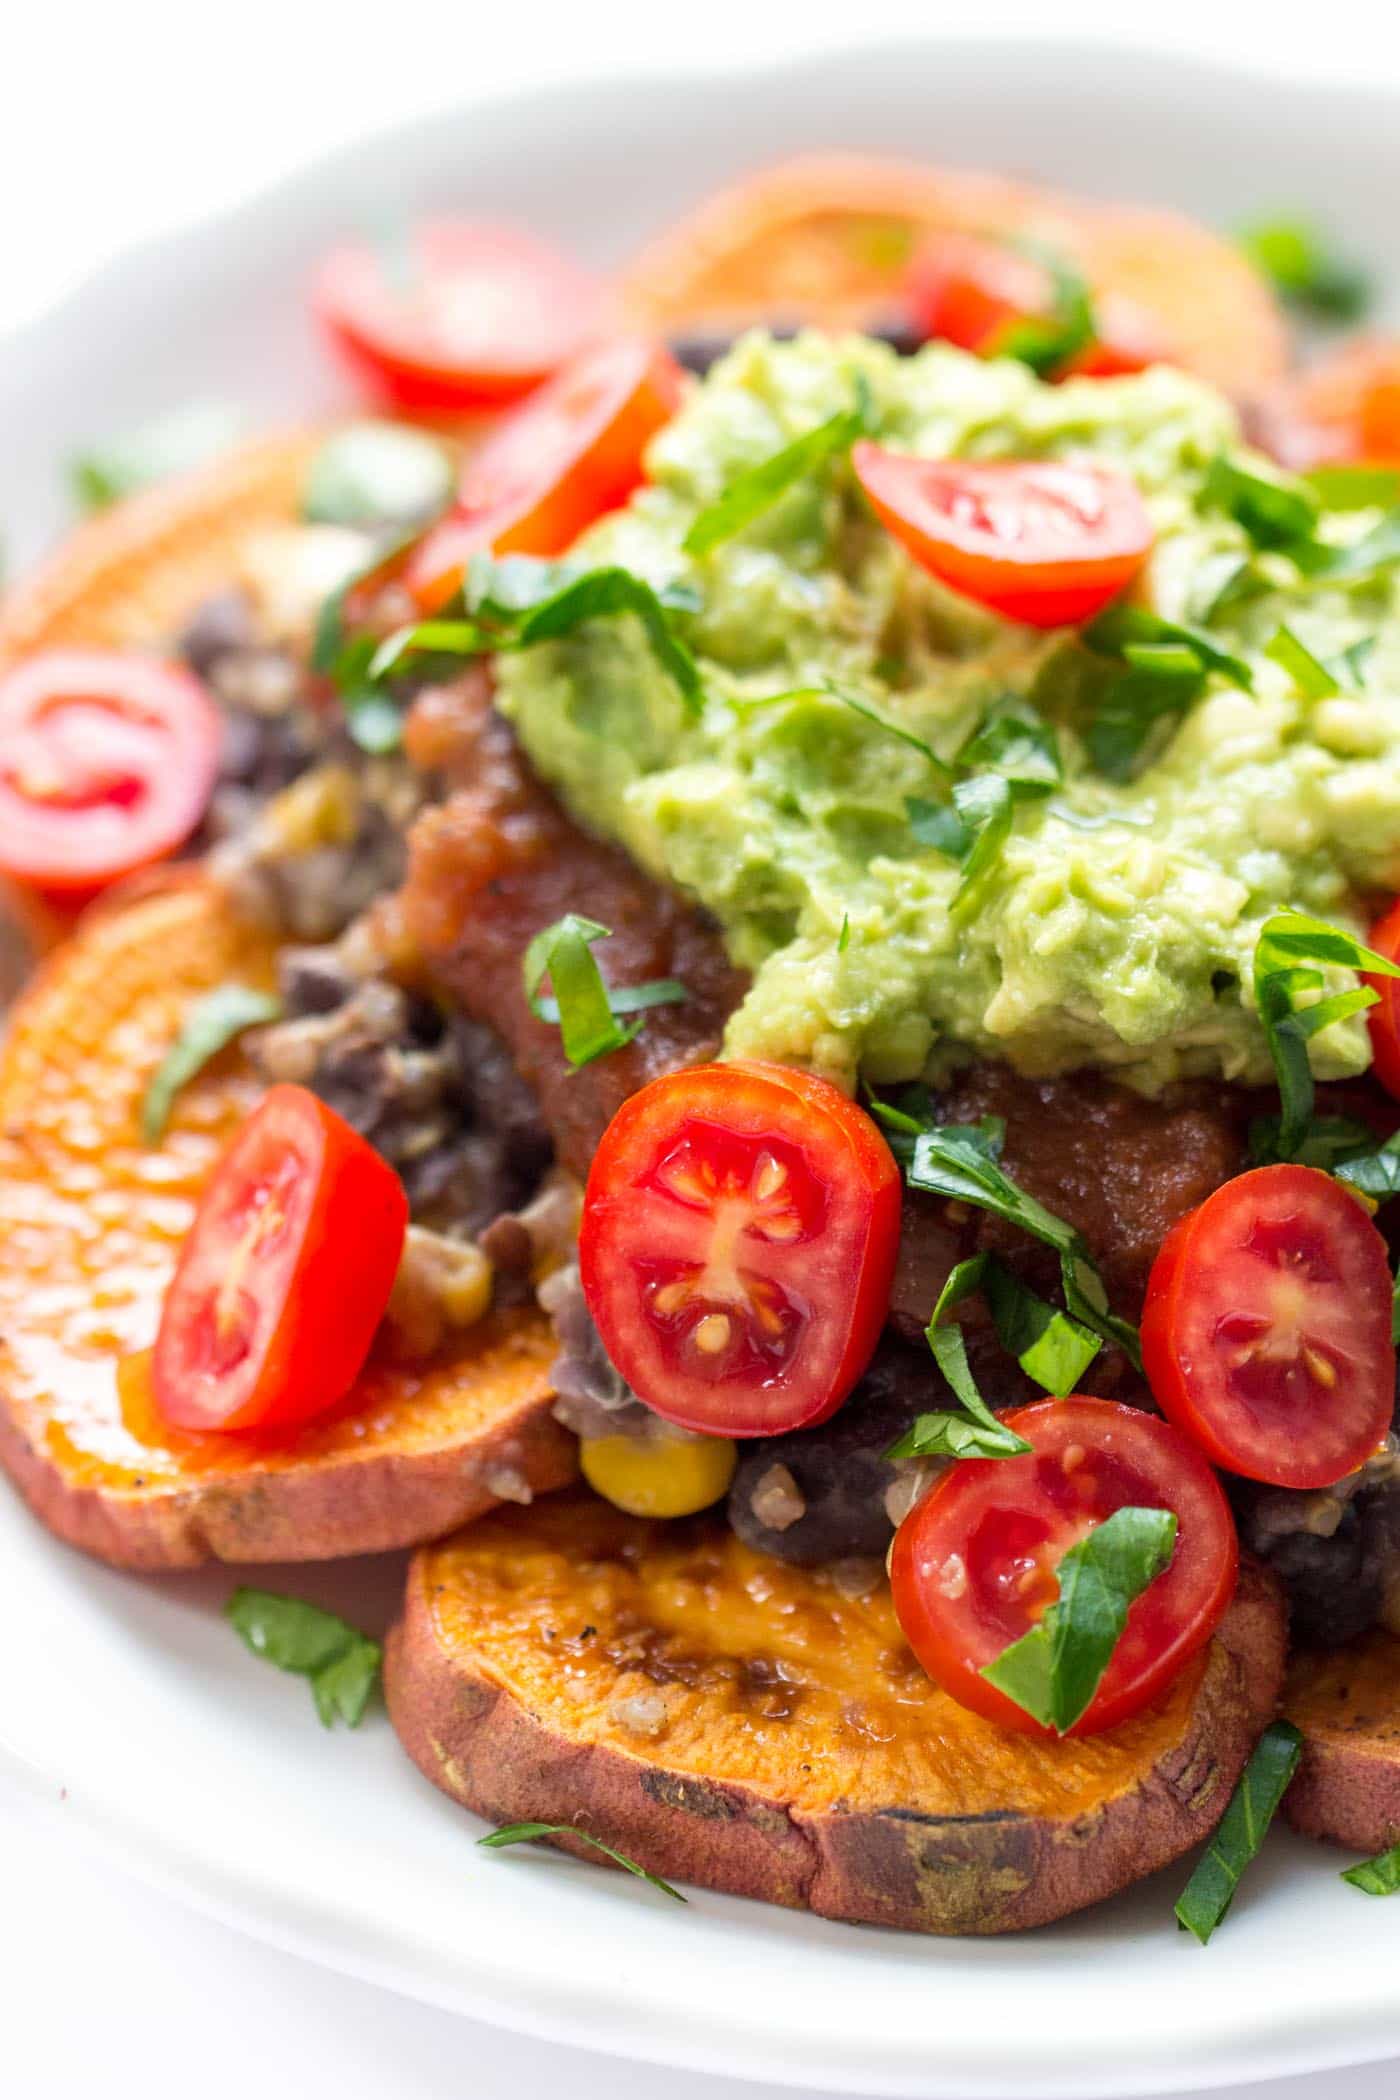 How to make the BEST DAMN vegan nachos on the planet!! Use sweet potatoes instead of corn chips, skip the meat and add black beans + quinoa, then top it all off with salsa, guac and cilantro. PERFECTION!